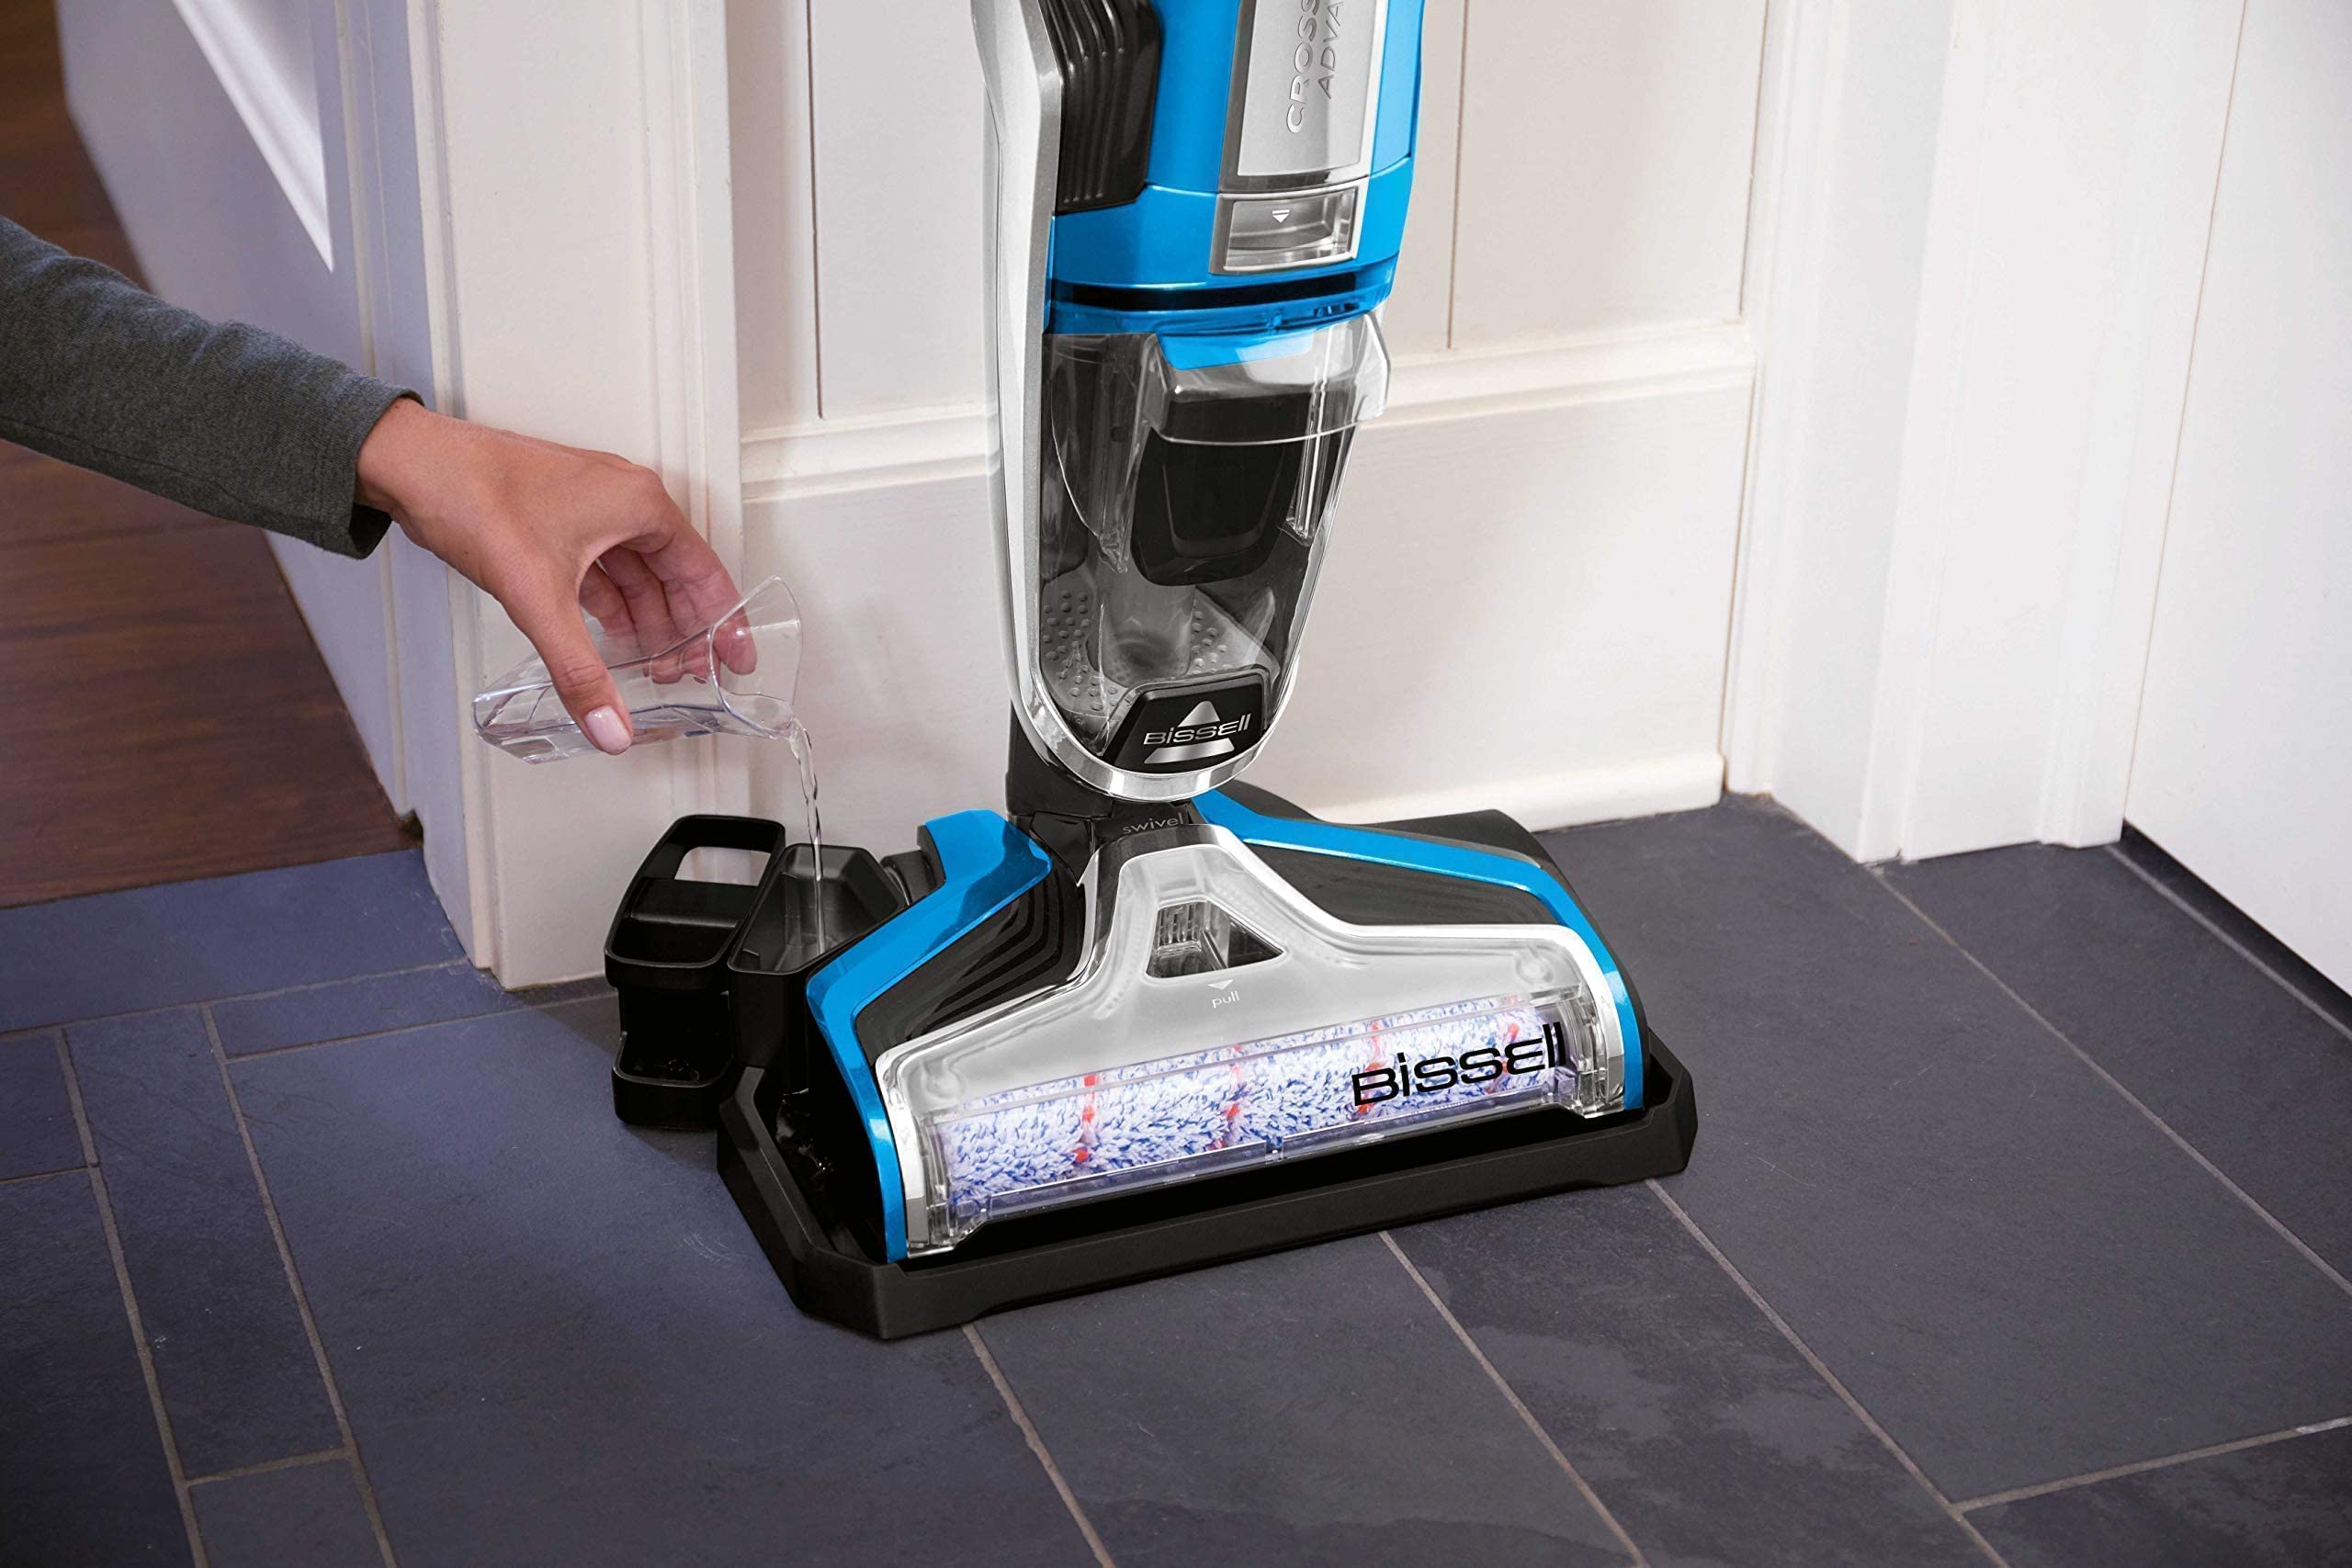  Bissell 2223e crosswave multi surface vacuum and wash